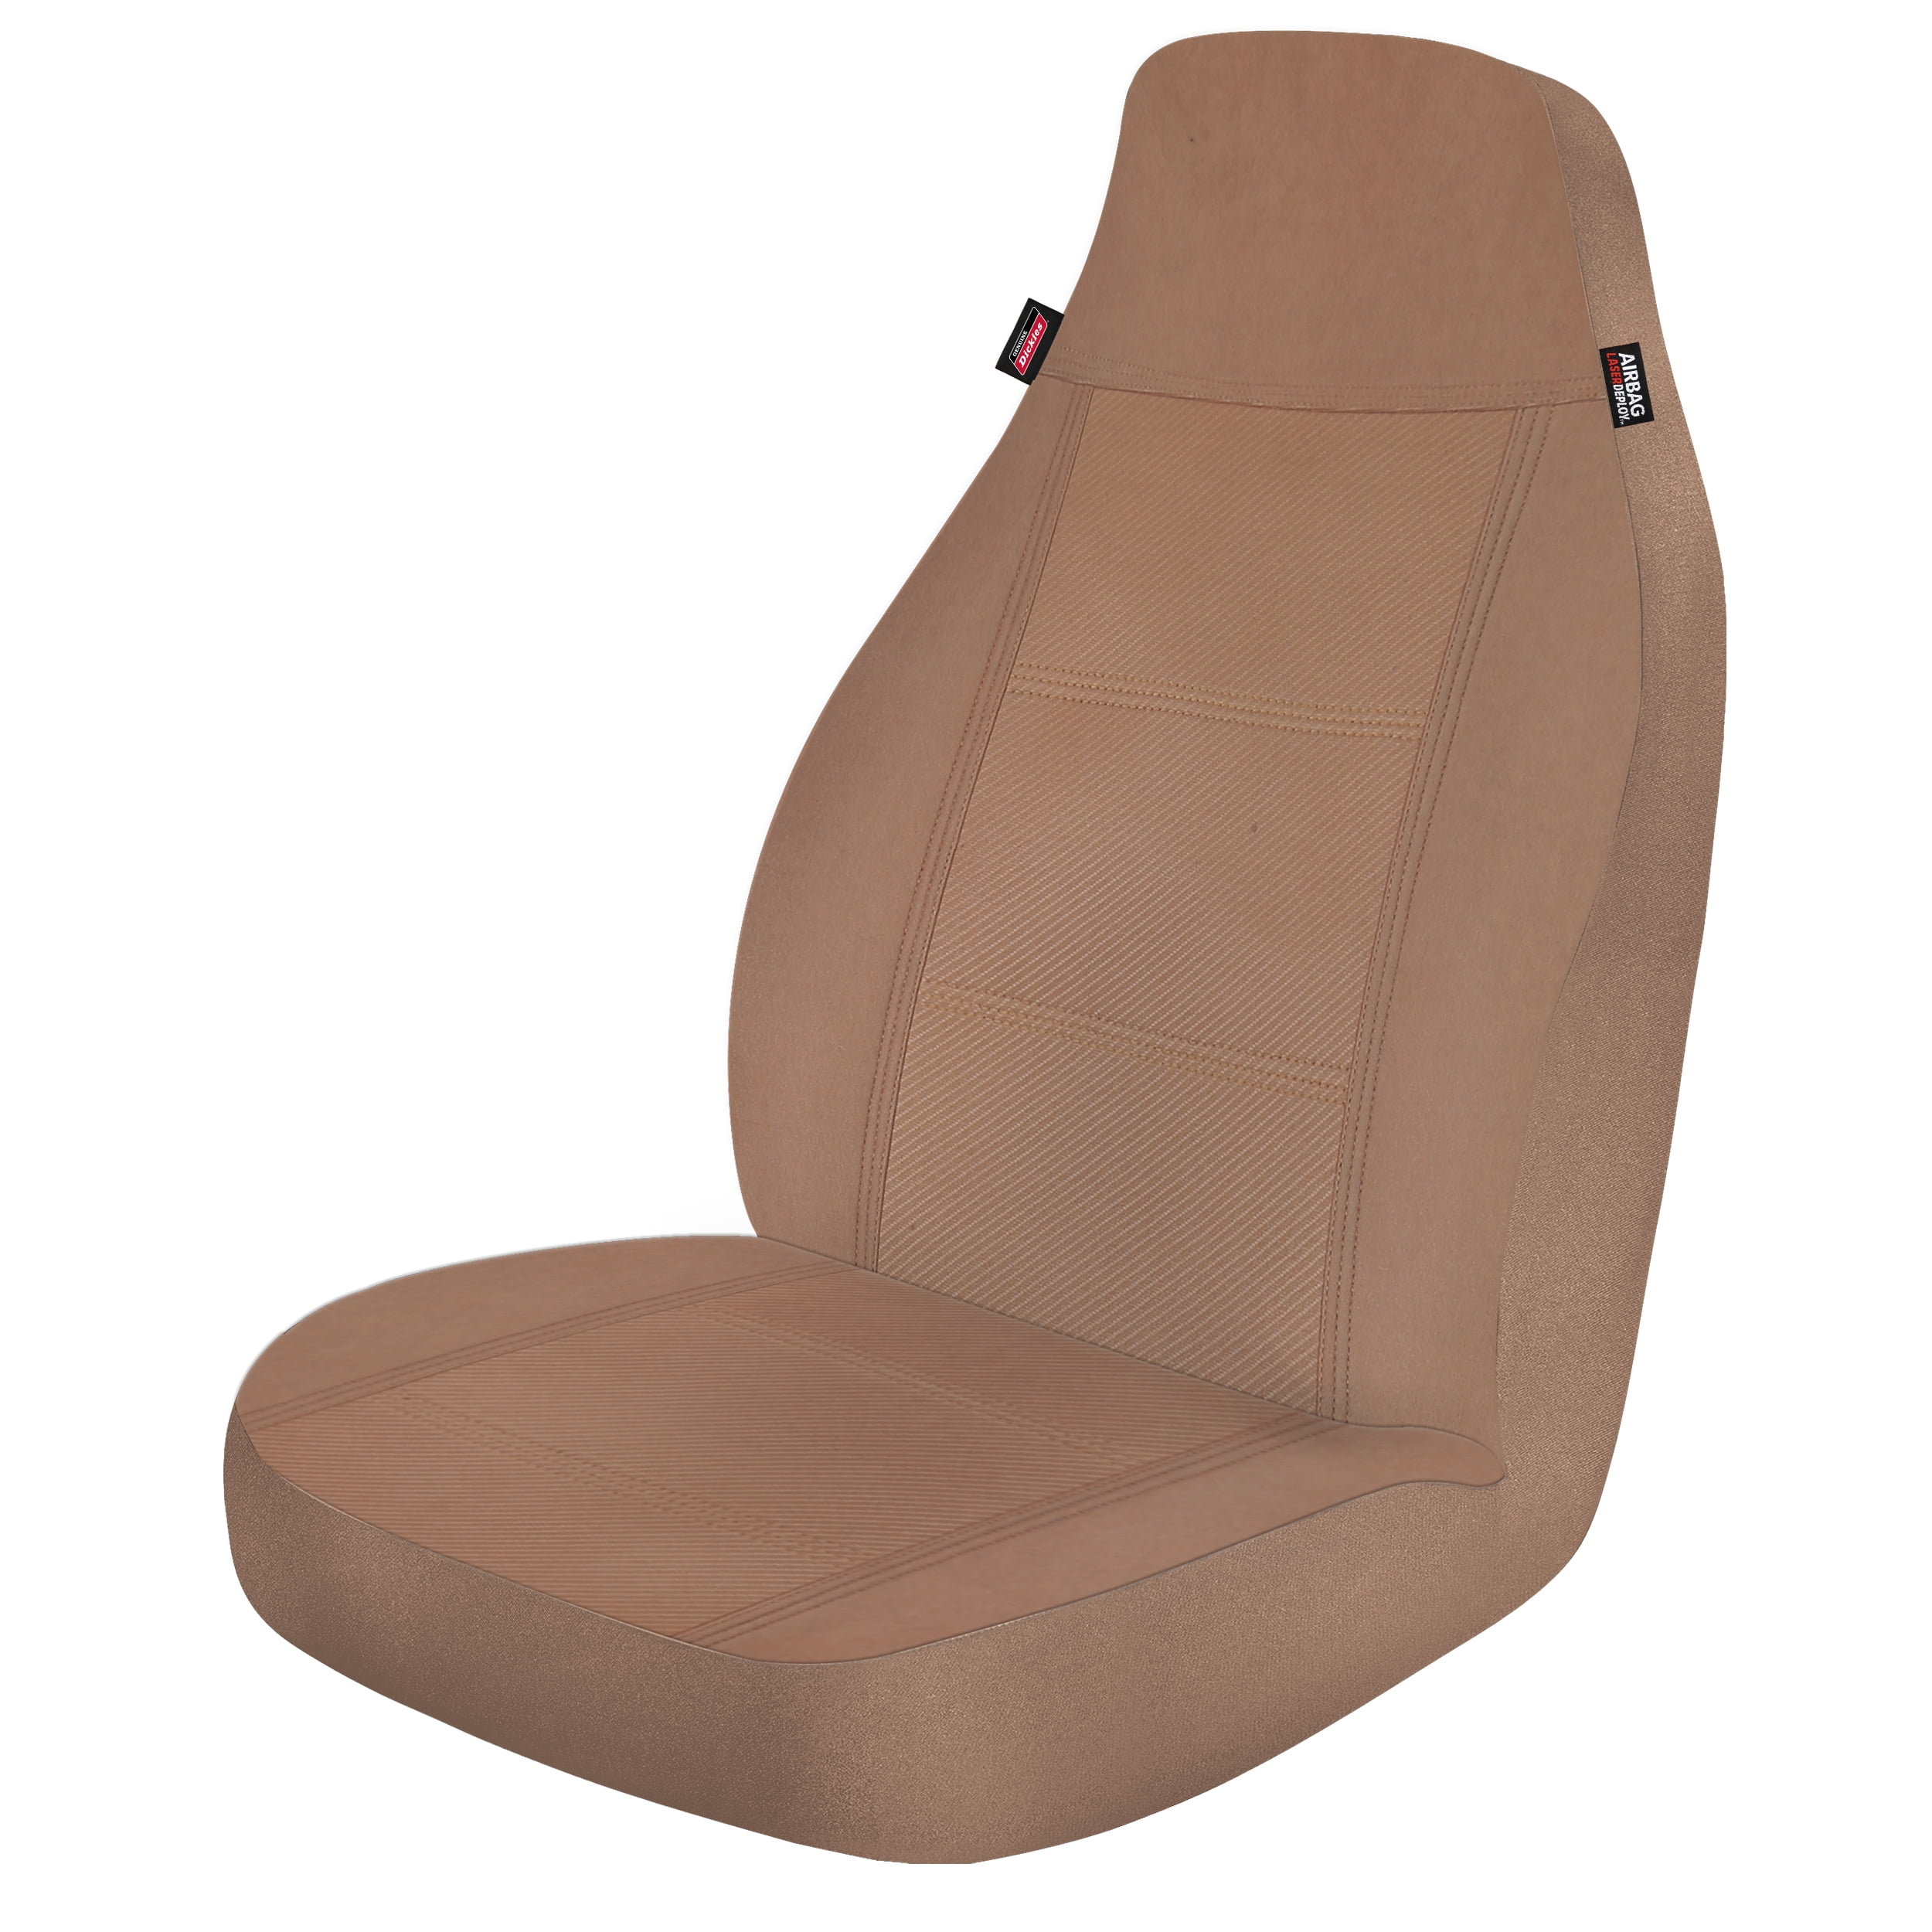 $236.97 Classic Leather LV Print Car Seat Covers Pads Car Seat Cushions  Pillows 11pcs - Beige